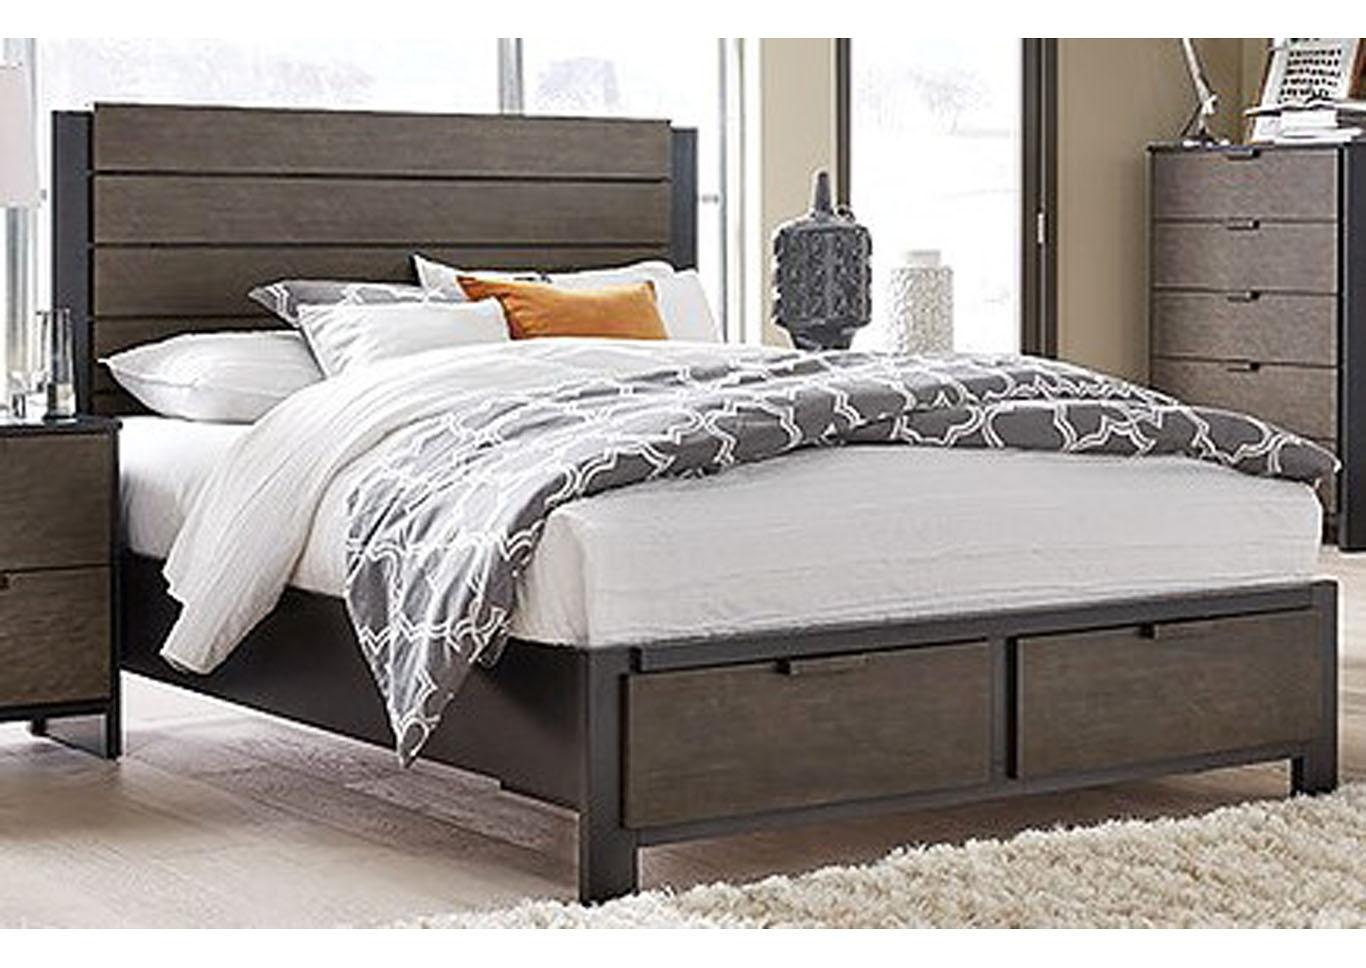 Paxton Storage Platform Bed Eastern, Eastern King Bed Frame With Drawers